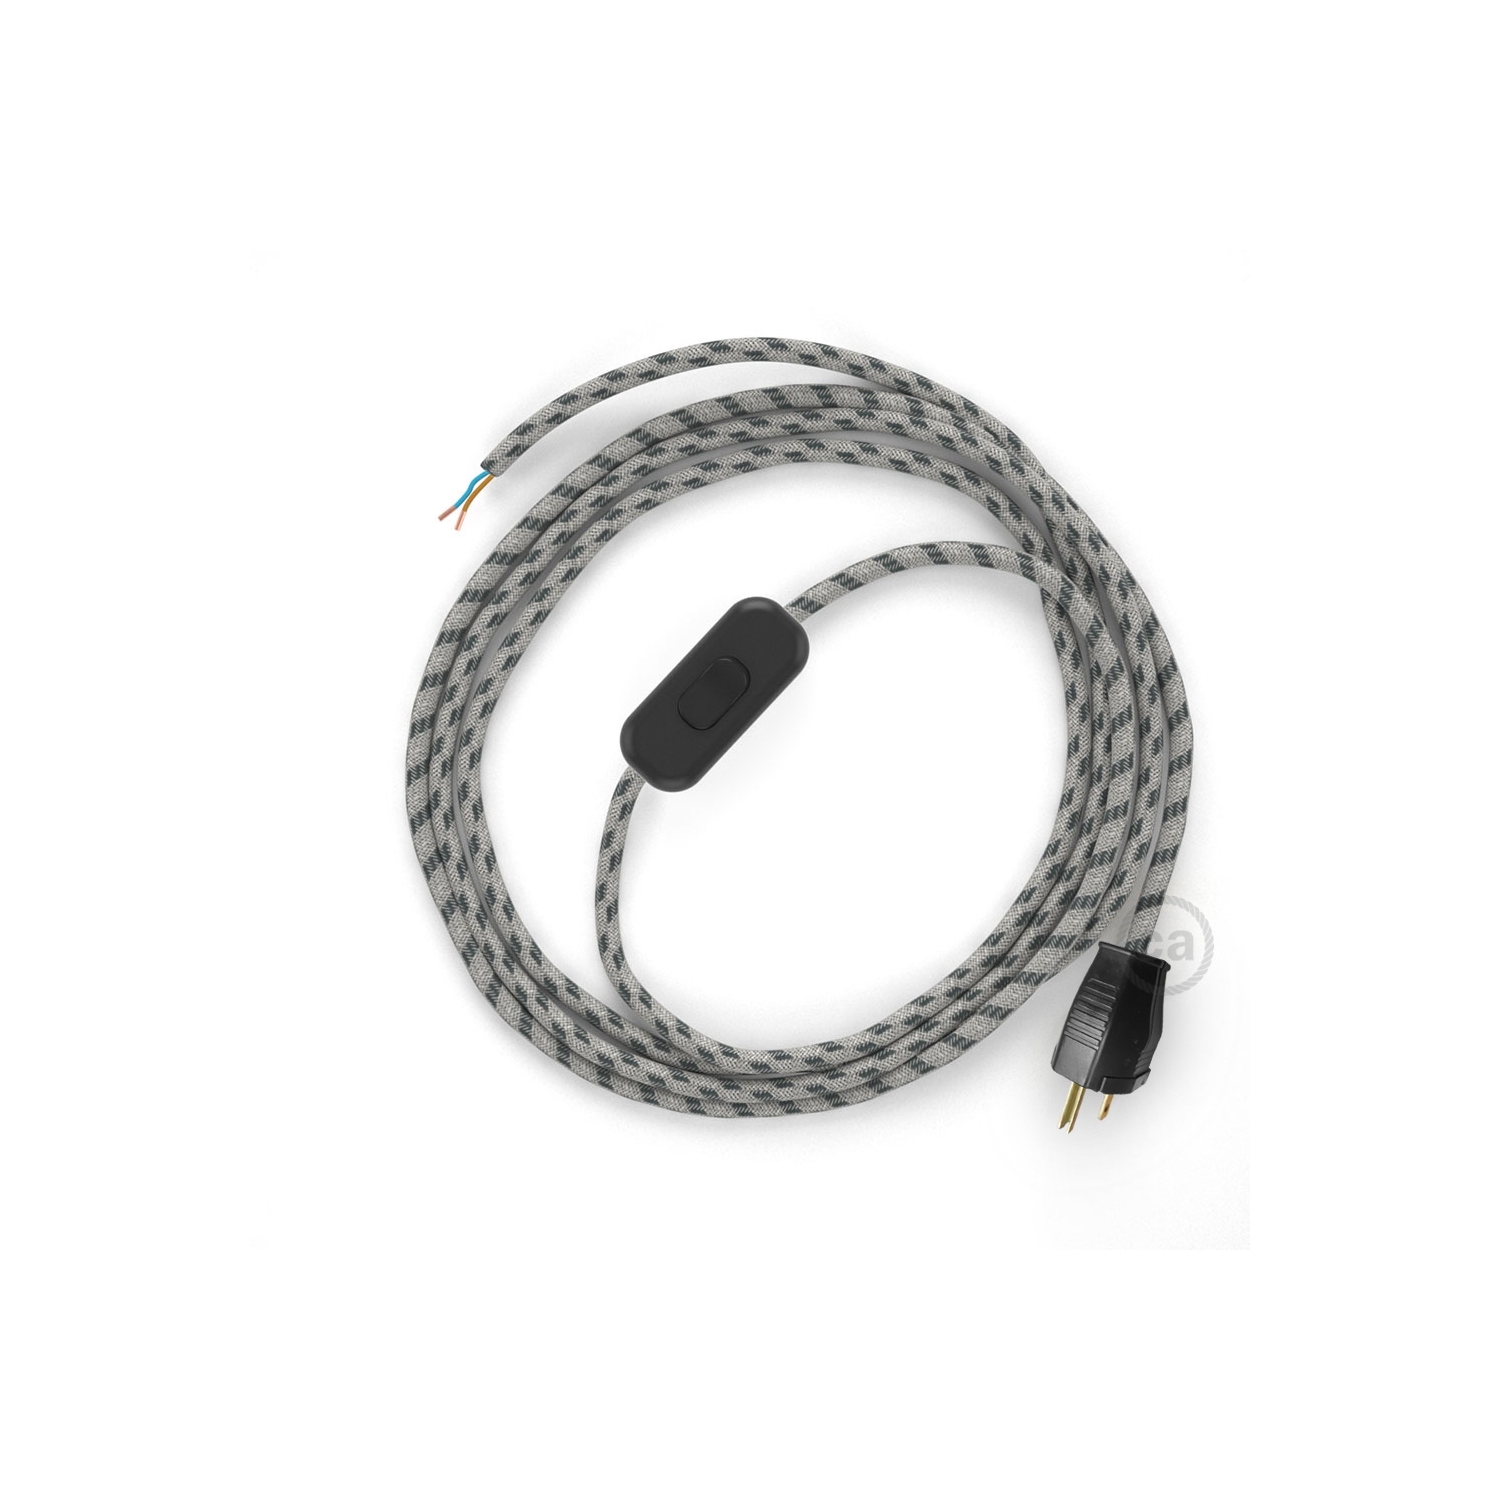 Power Cord with in-line switch, RD54 Natural & Charcoal Linen Stripe - Choose color of switch/plug